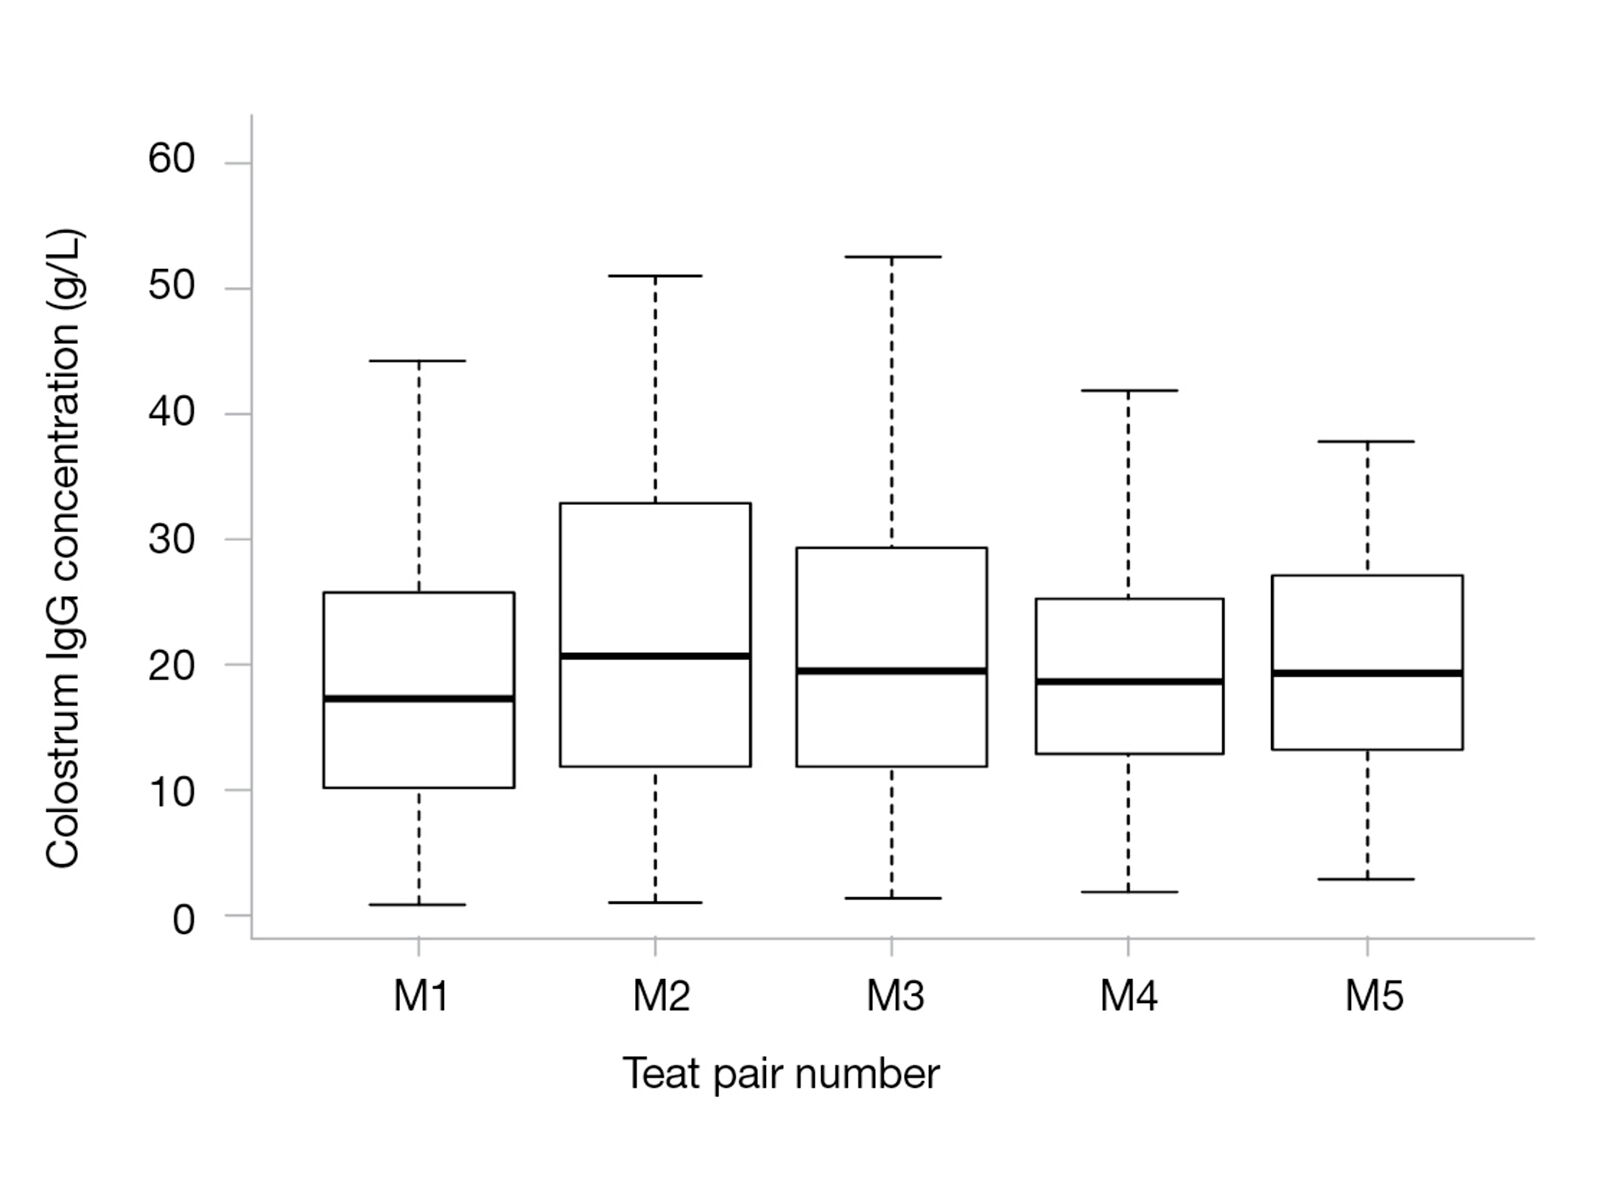 Immunological quality of colostrum according to number of teat pairs